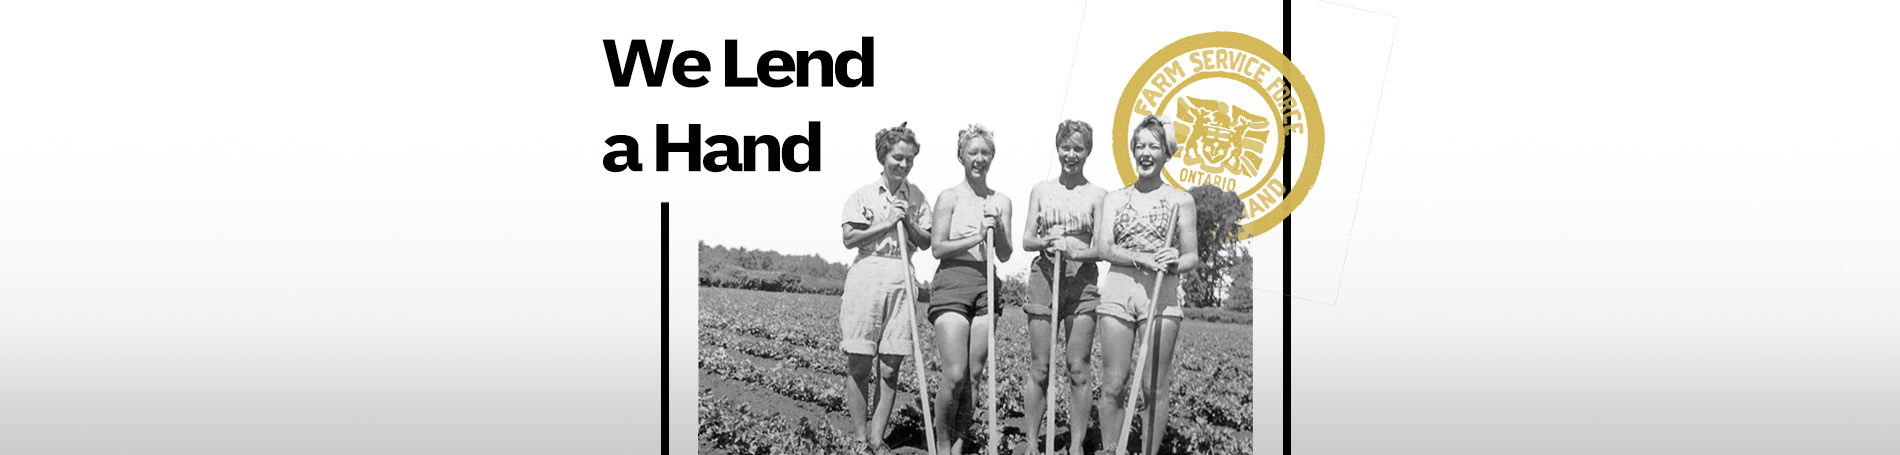 Farmerettes standing in the field beside text, "We Lend a Hand".